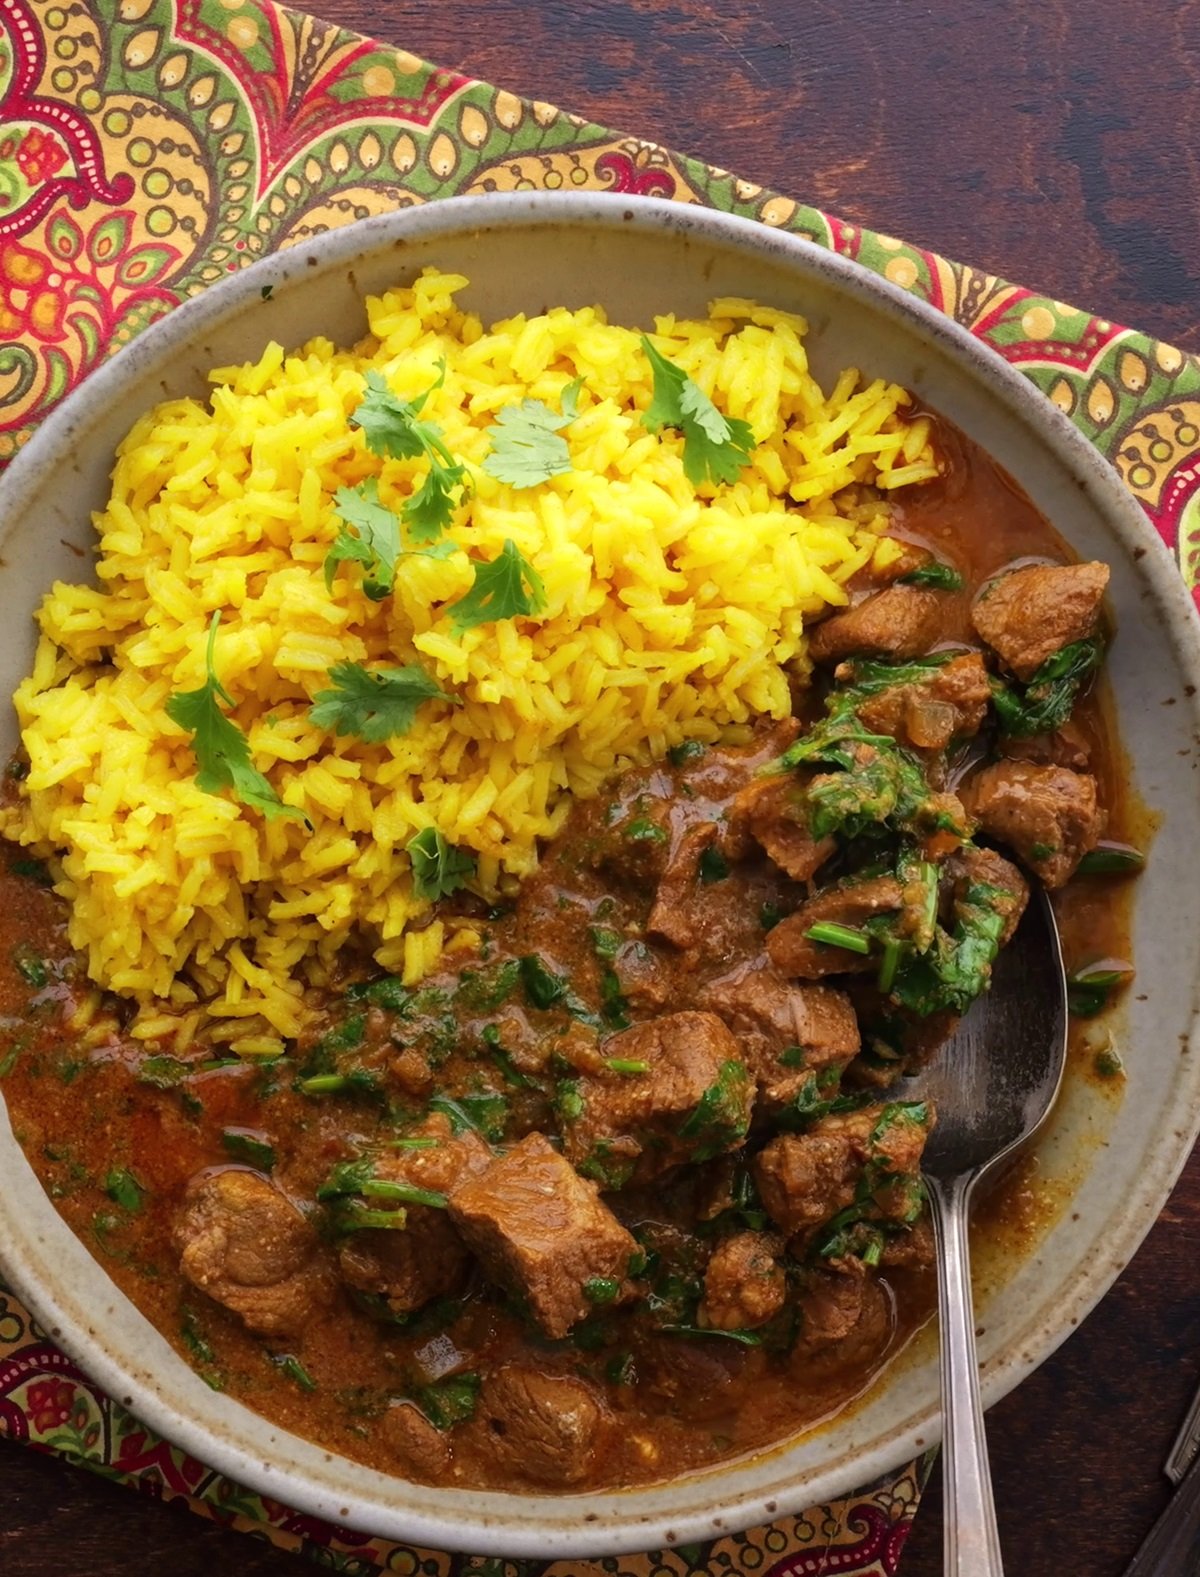 Big bowl of lamb curry with saffron rice.